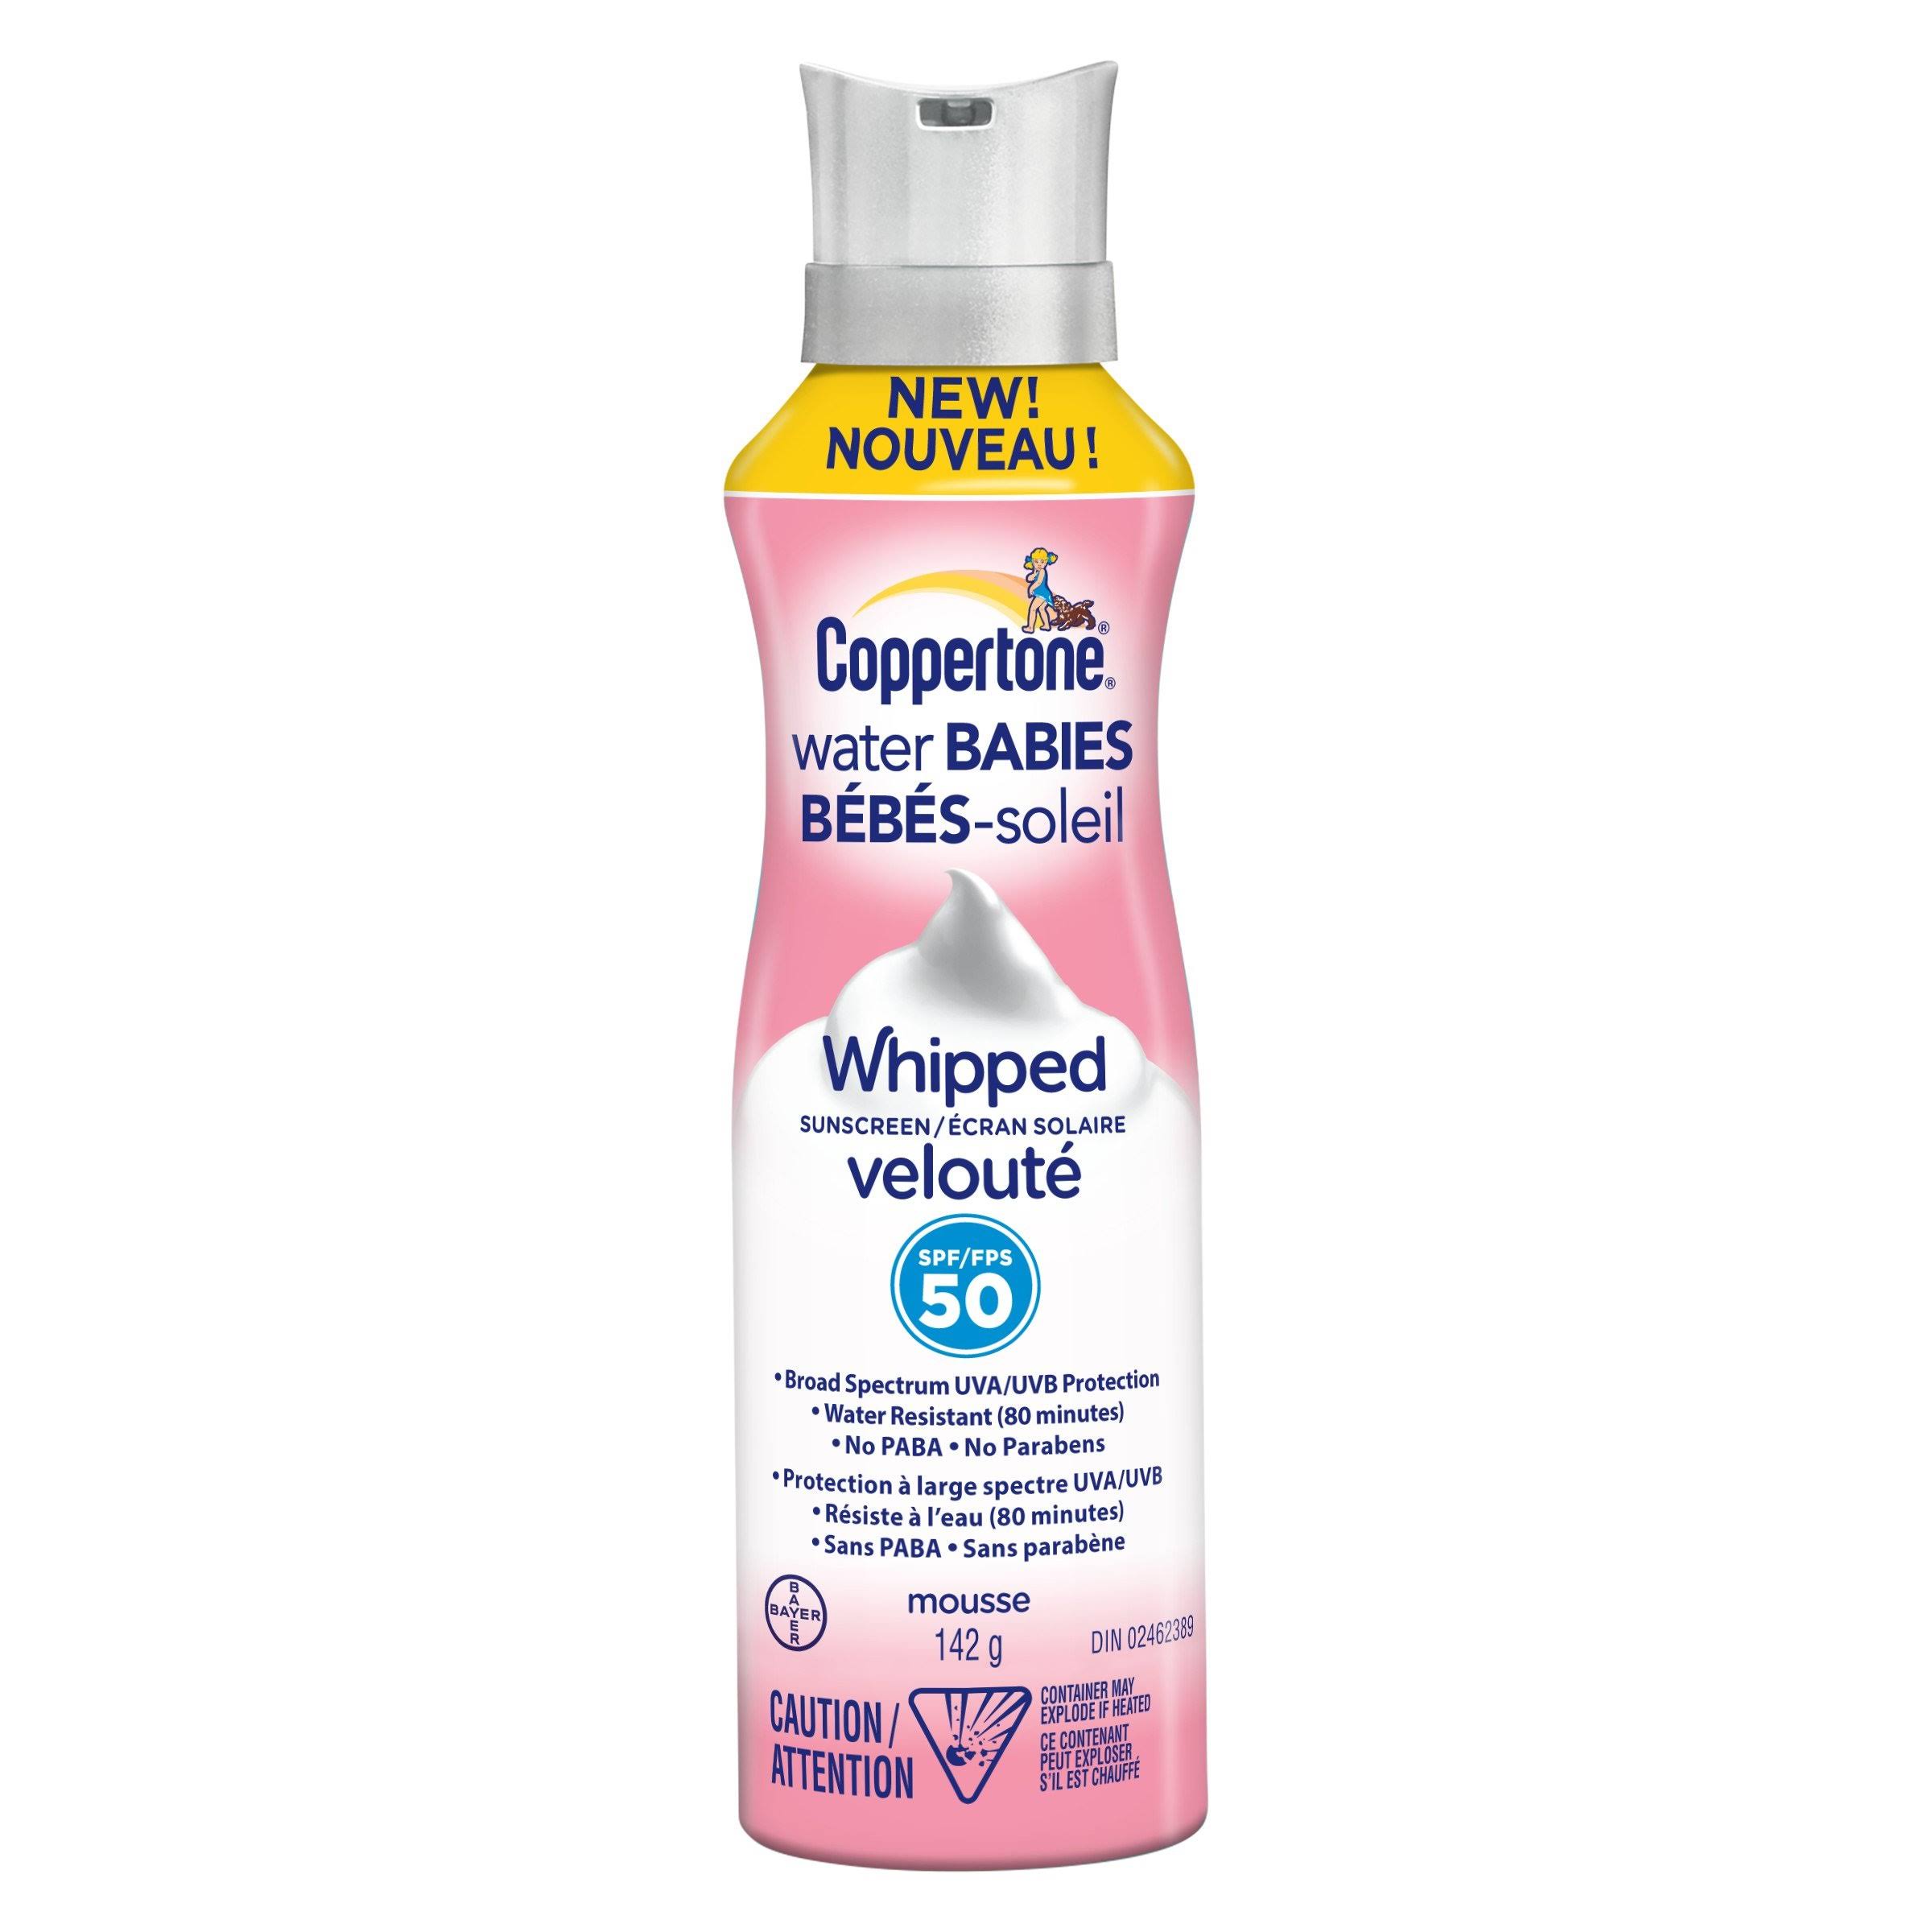 Coppertone SPF 50 Water Babies Whipped Sunscreen